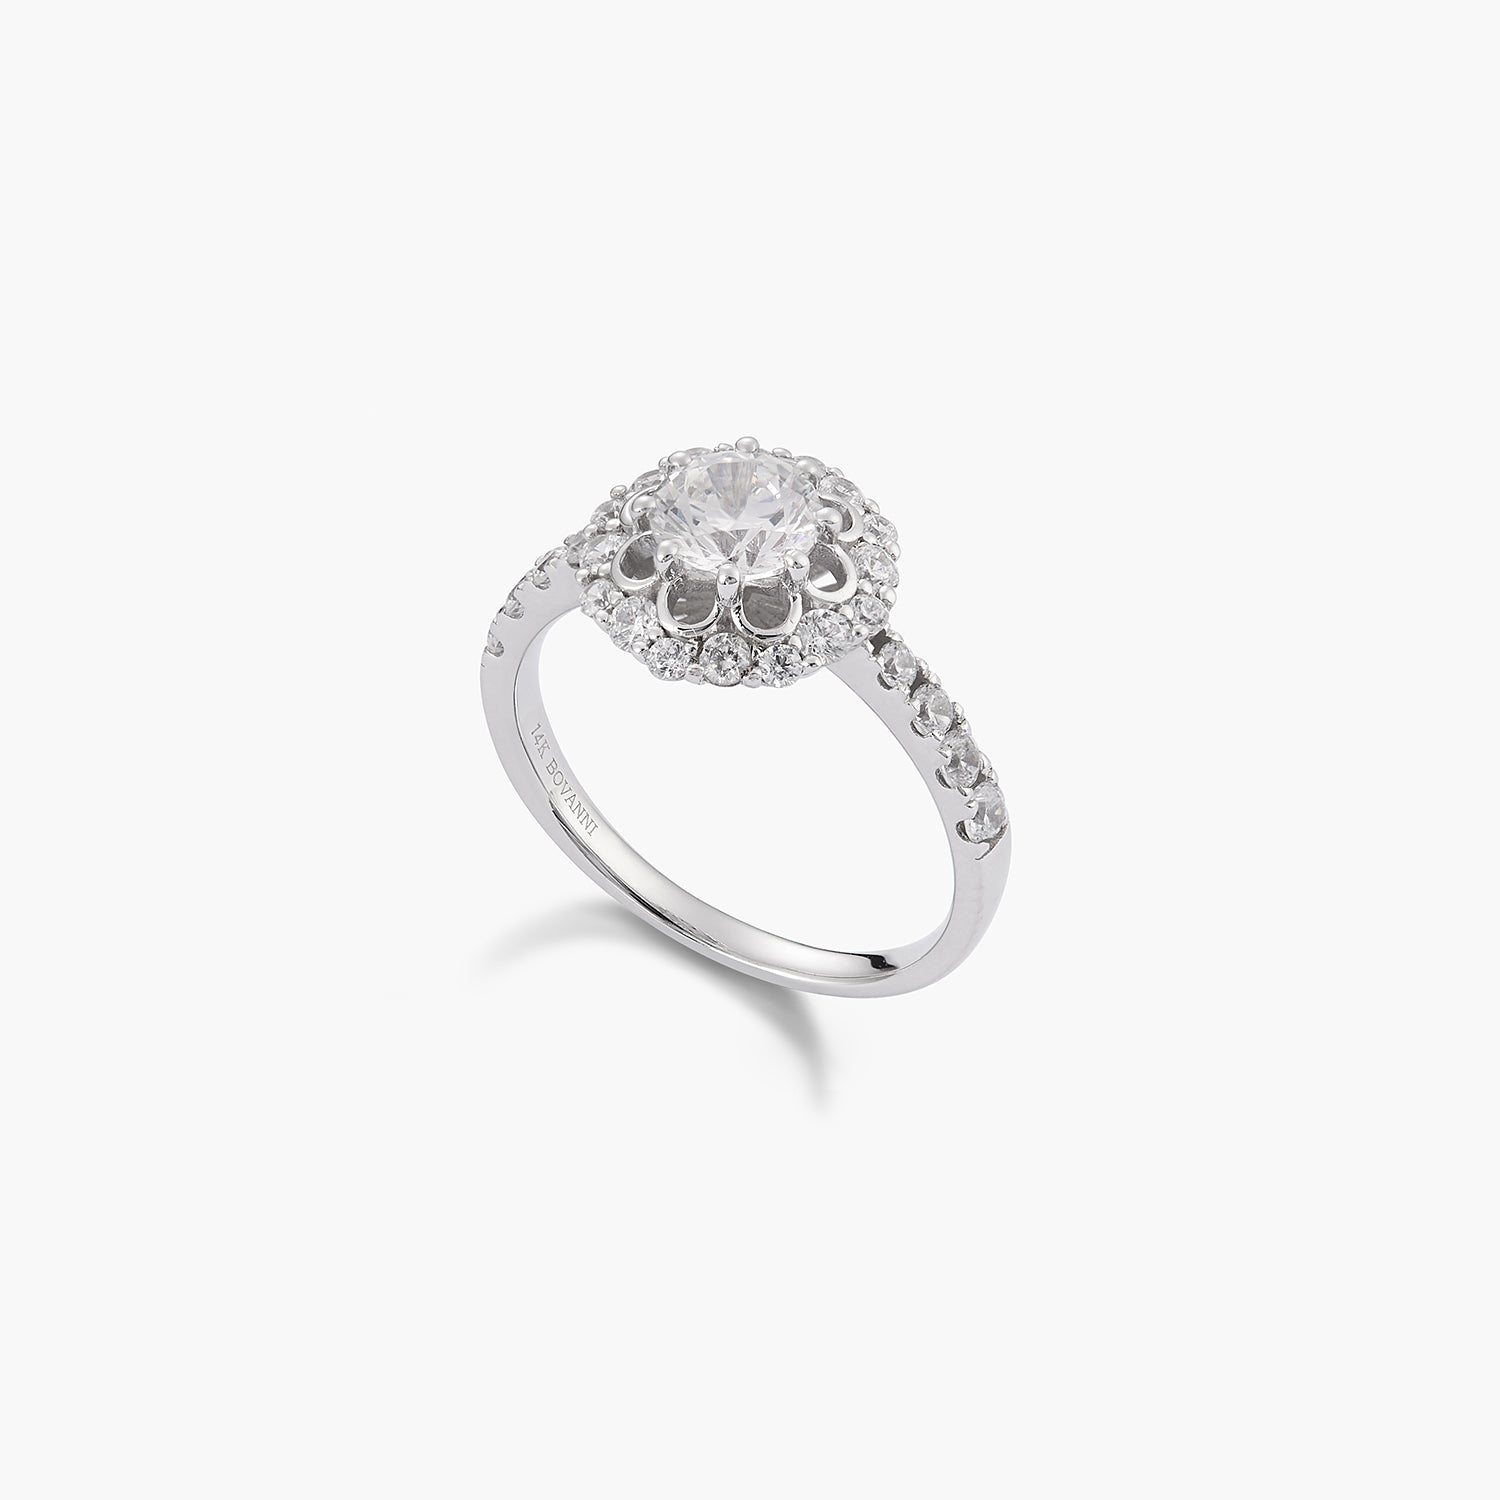 Floral Halo Engagement Ring With Moissanite Diamond